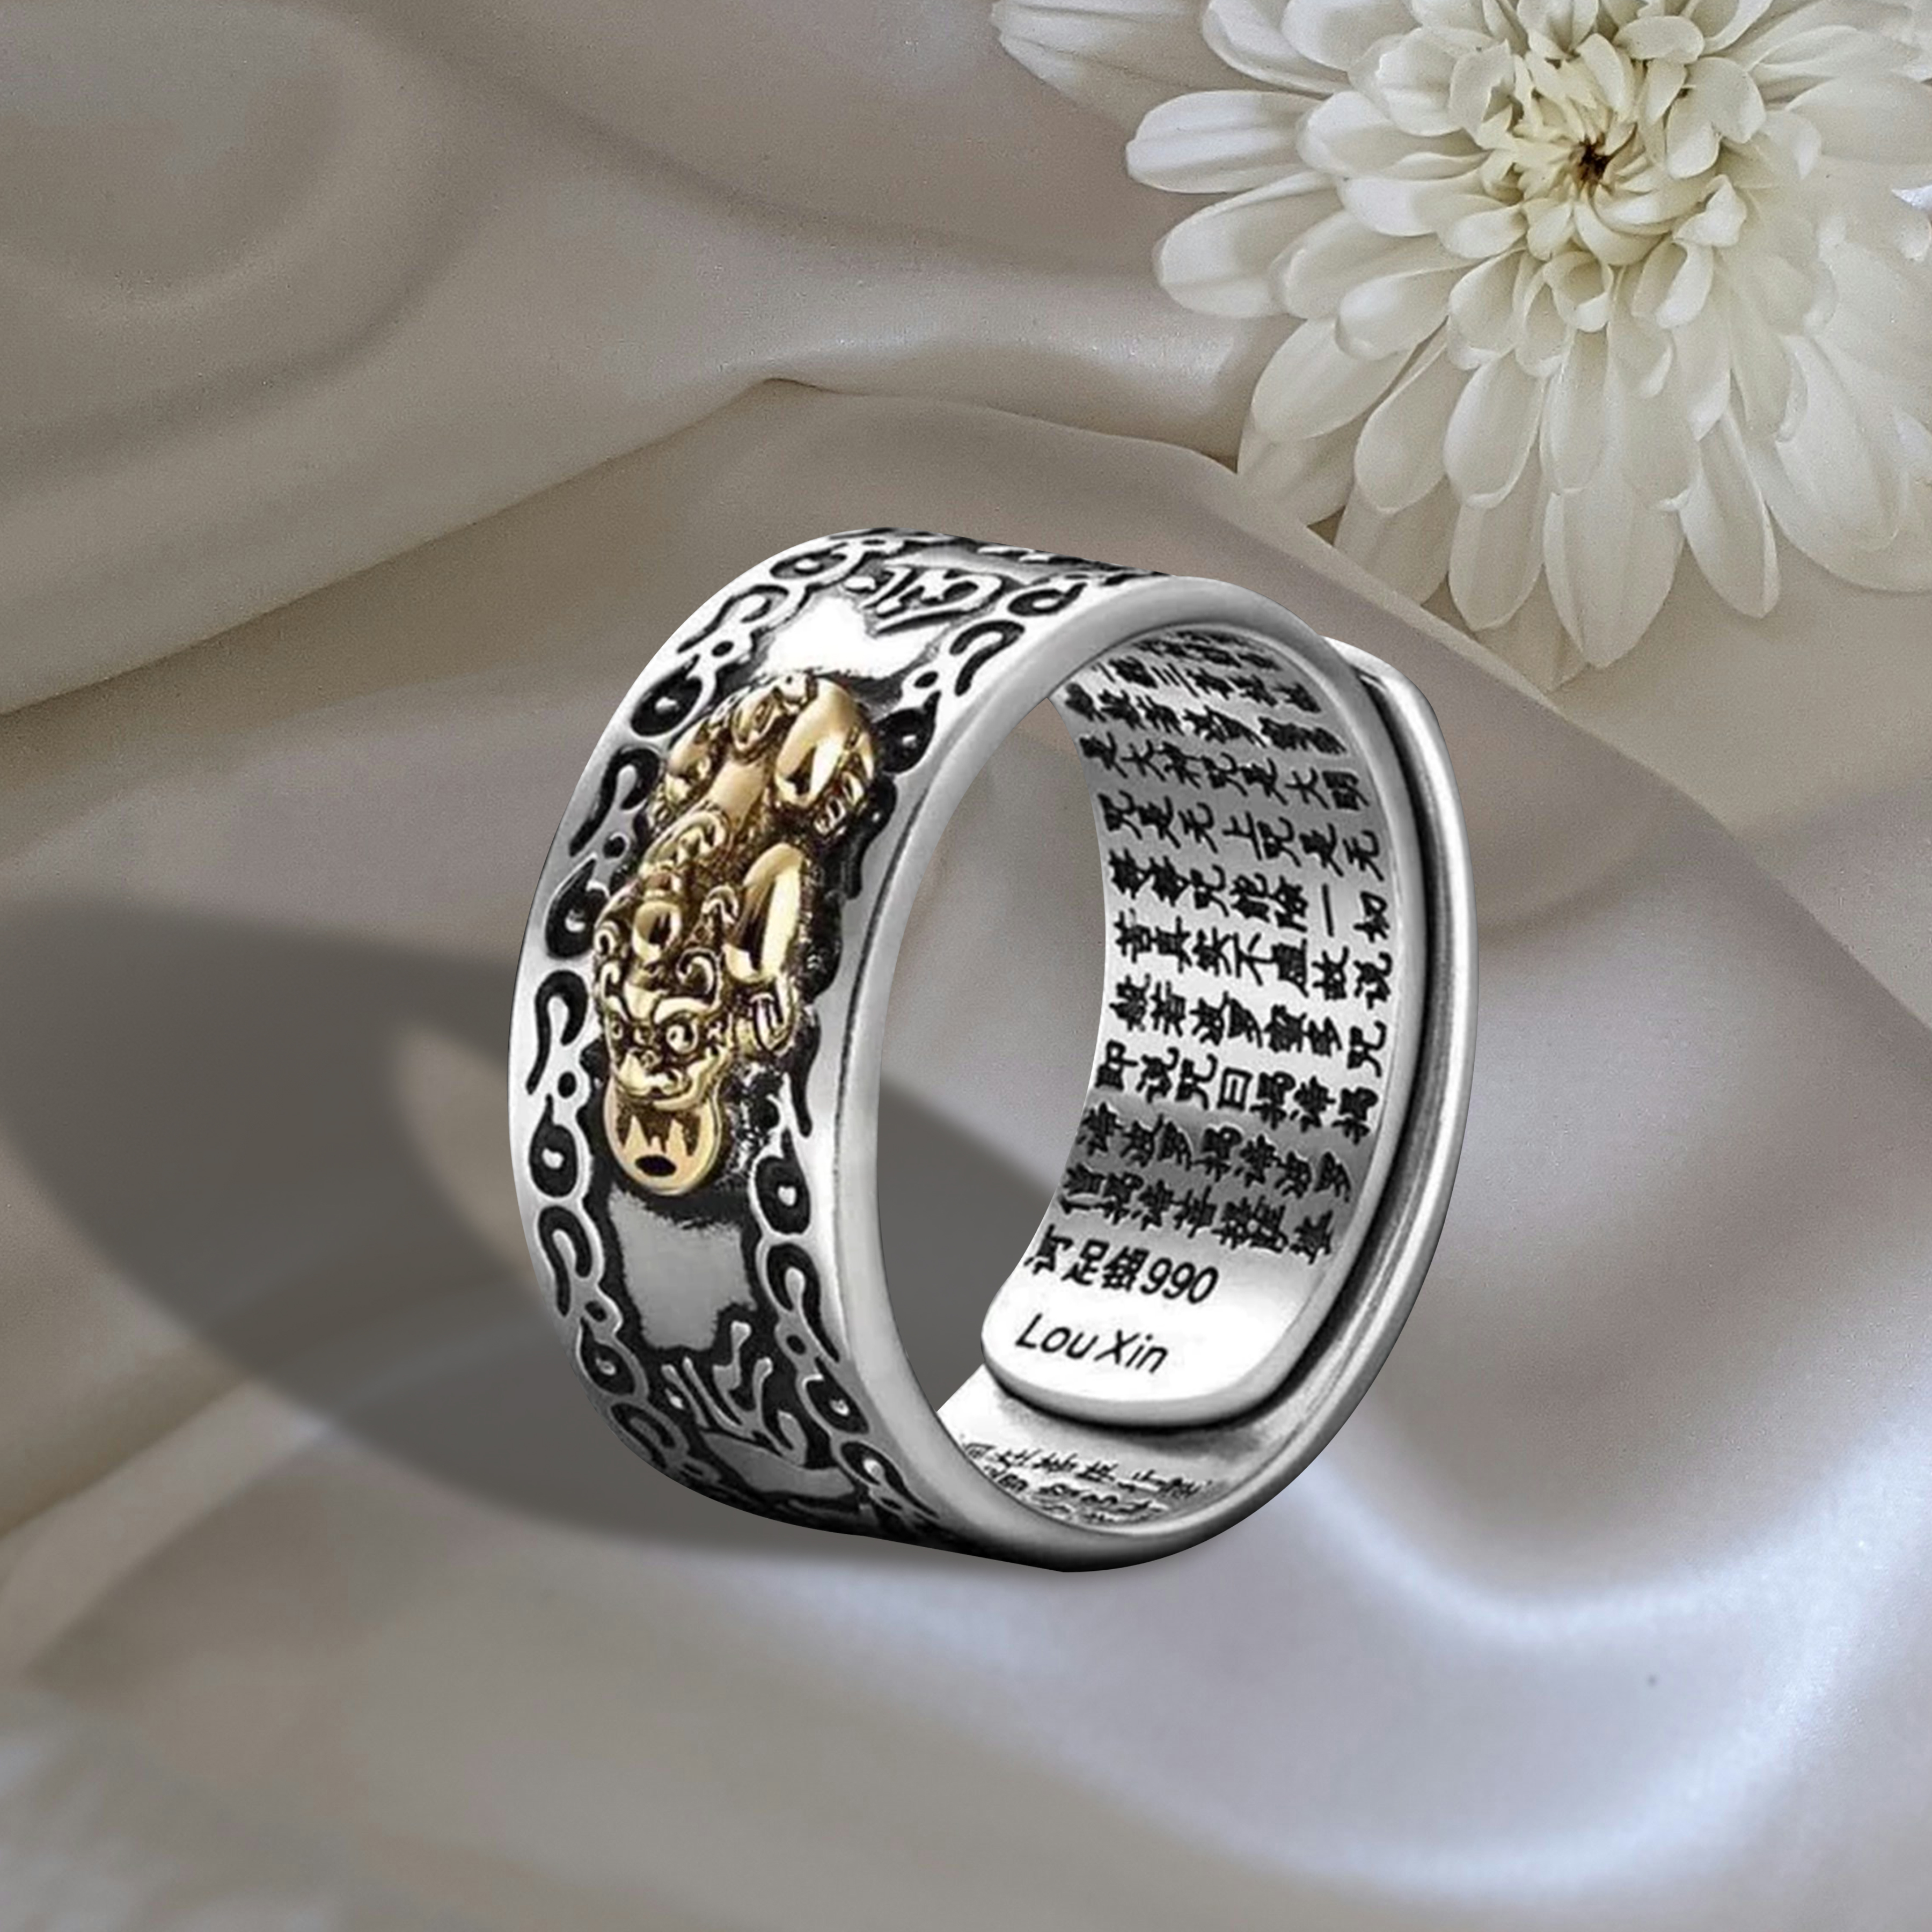 Lucklumen Feng Shui Pixiu Ring Attracts Wealth and Success 